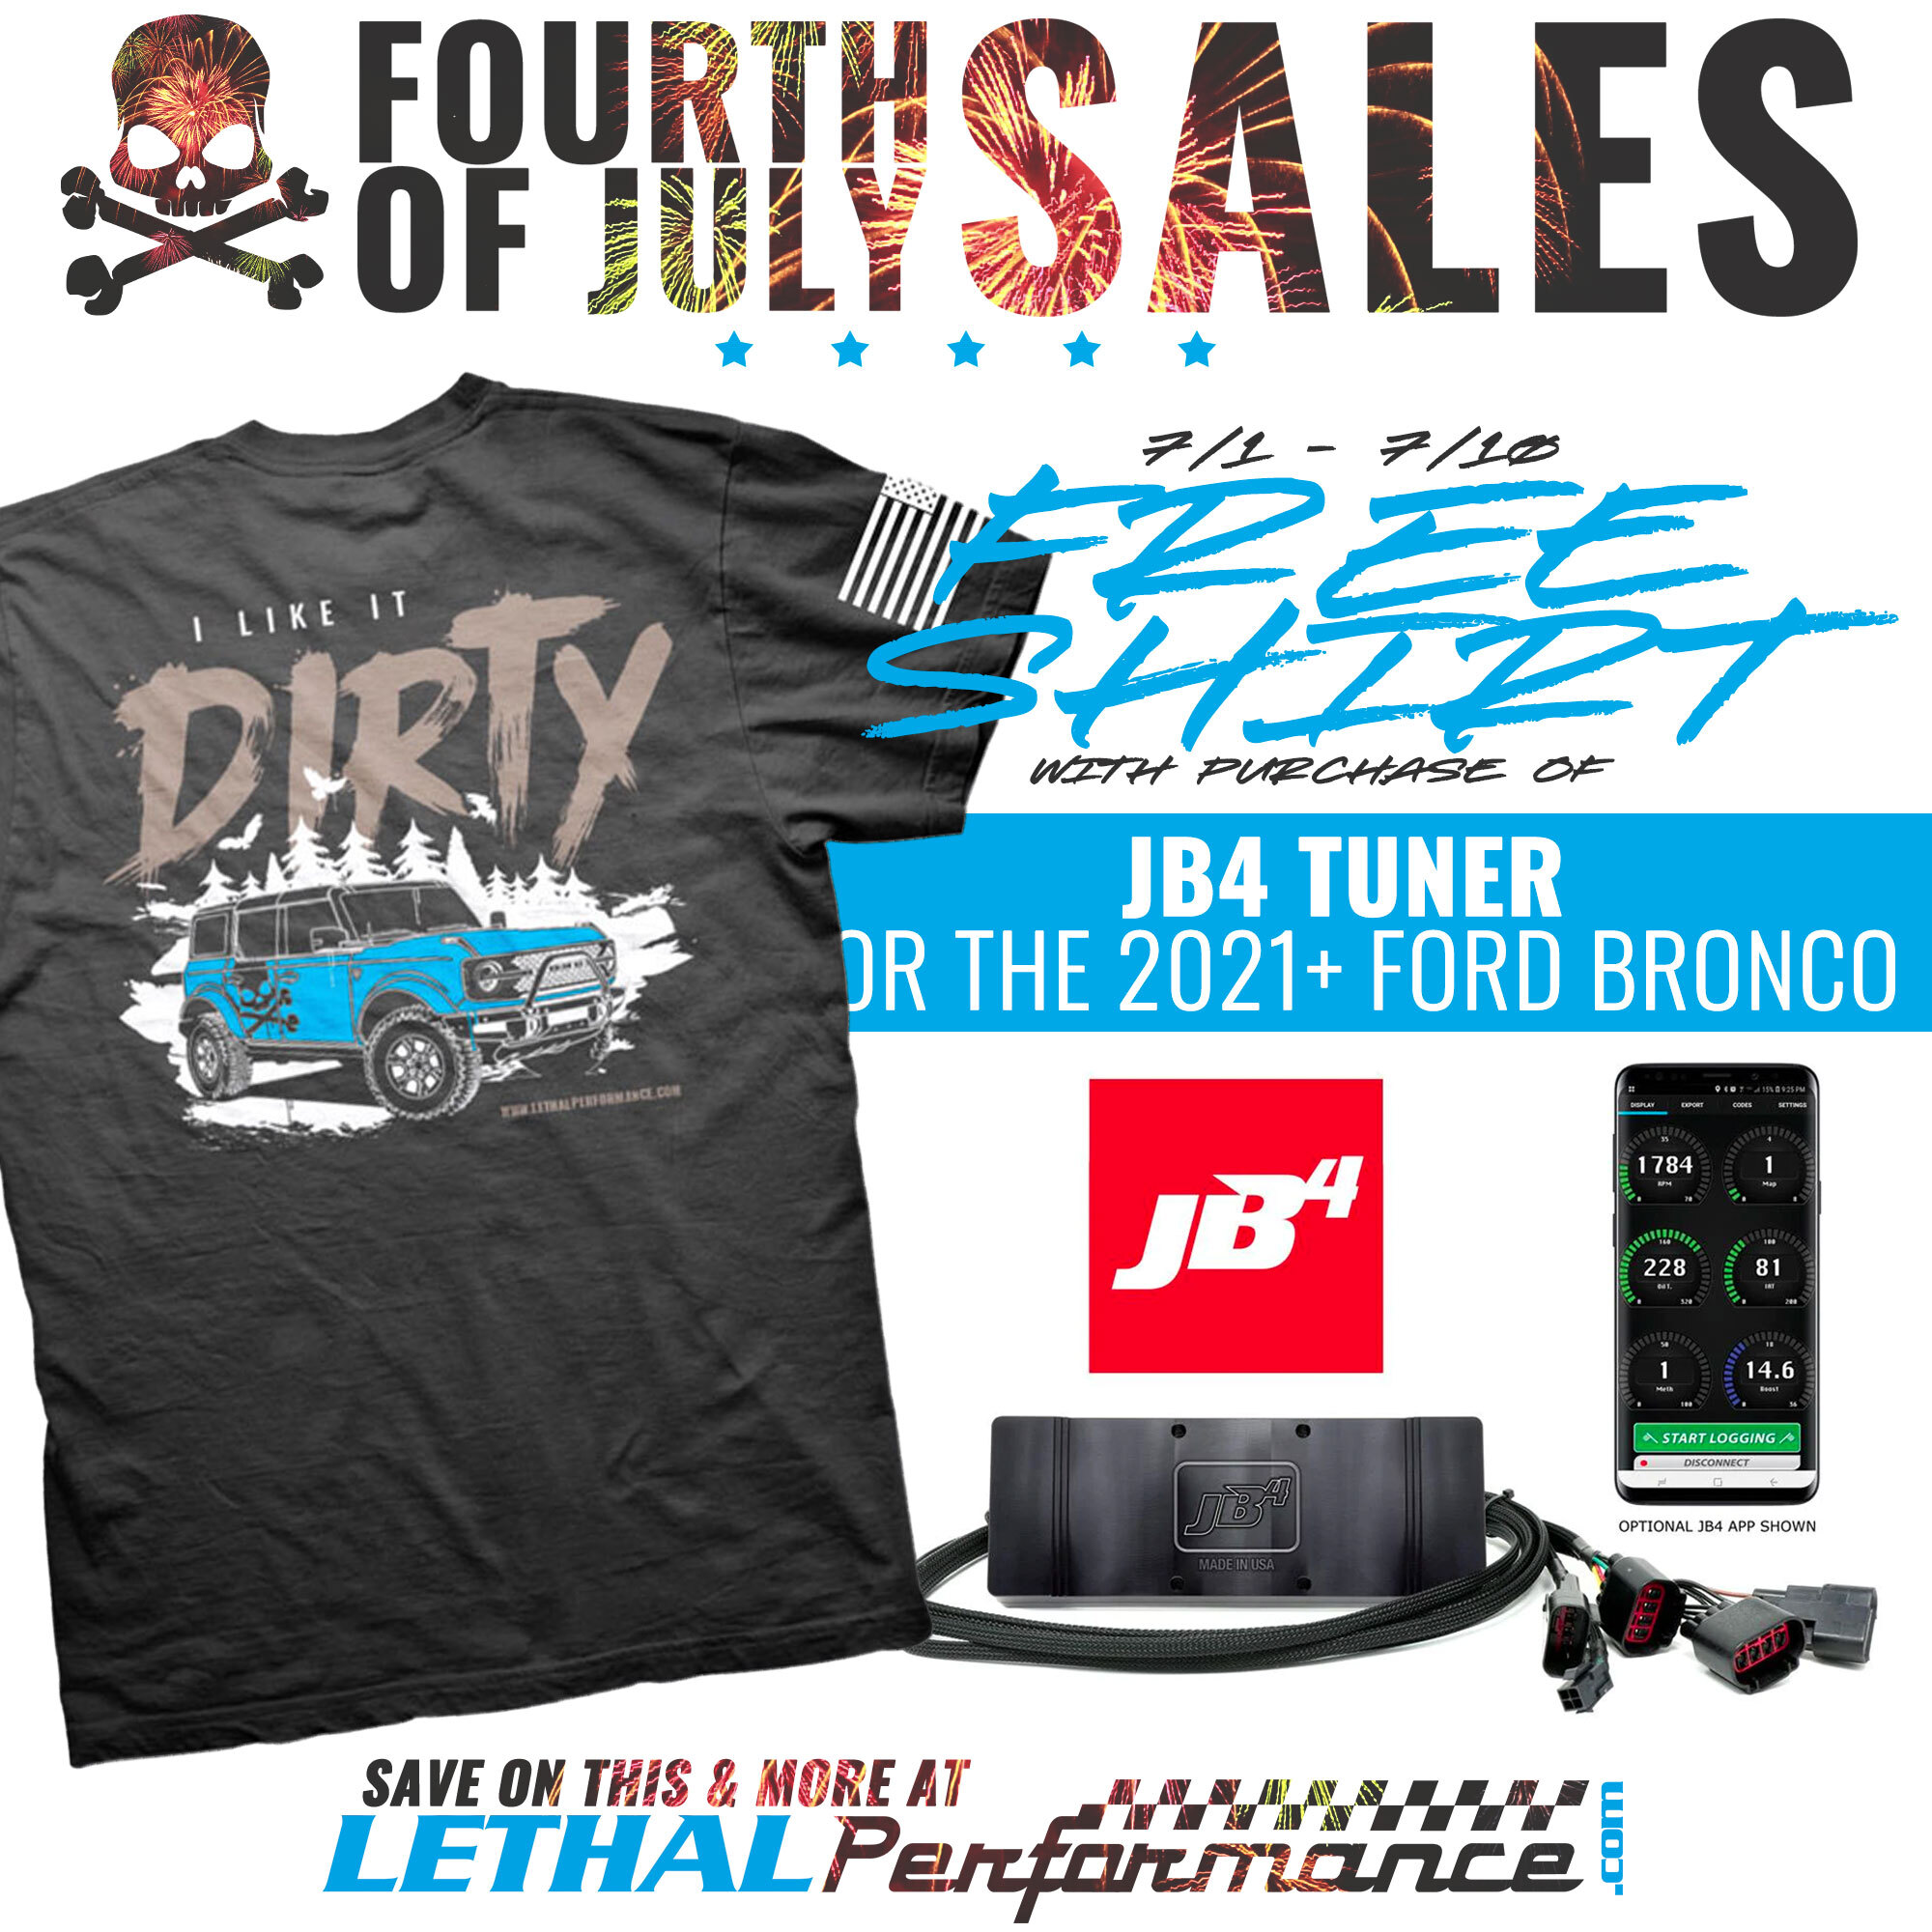 Ford Bronco 4th of July SALES kick off today!! Site-wide, Lethal Performance Drag Packs & MORE!!! jb4shirt